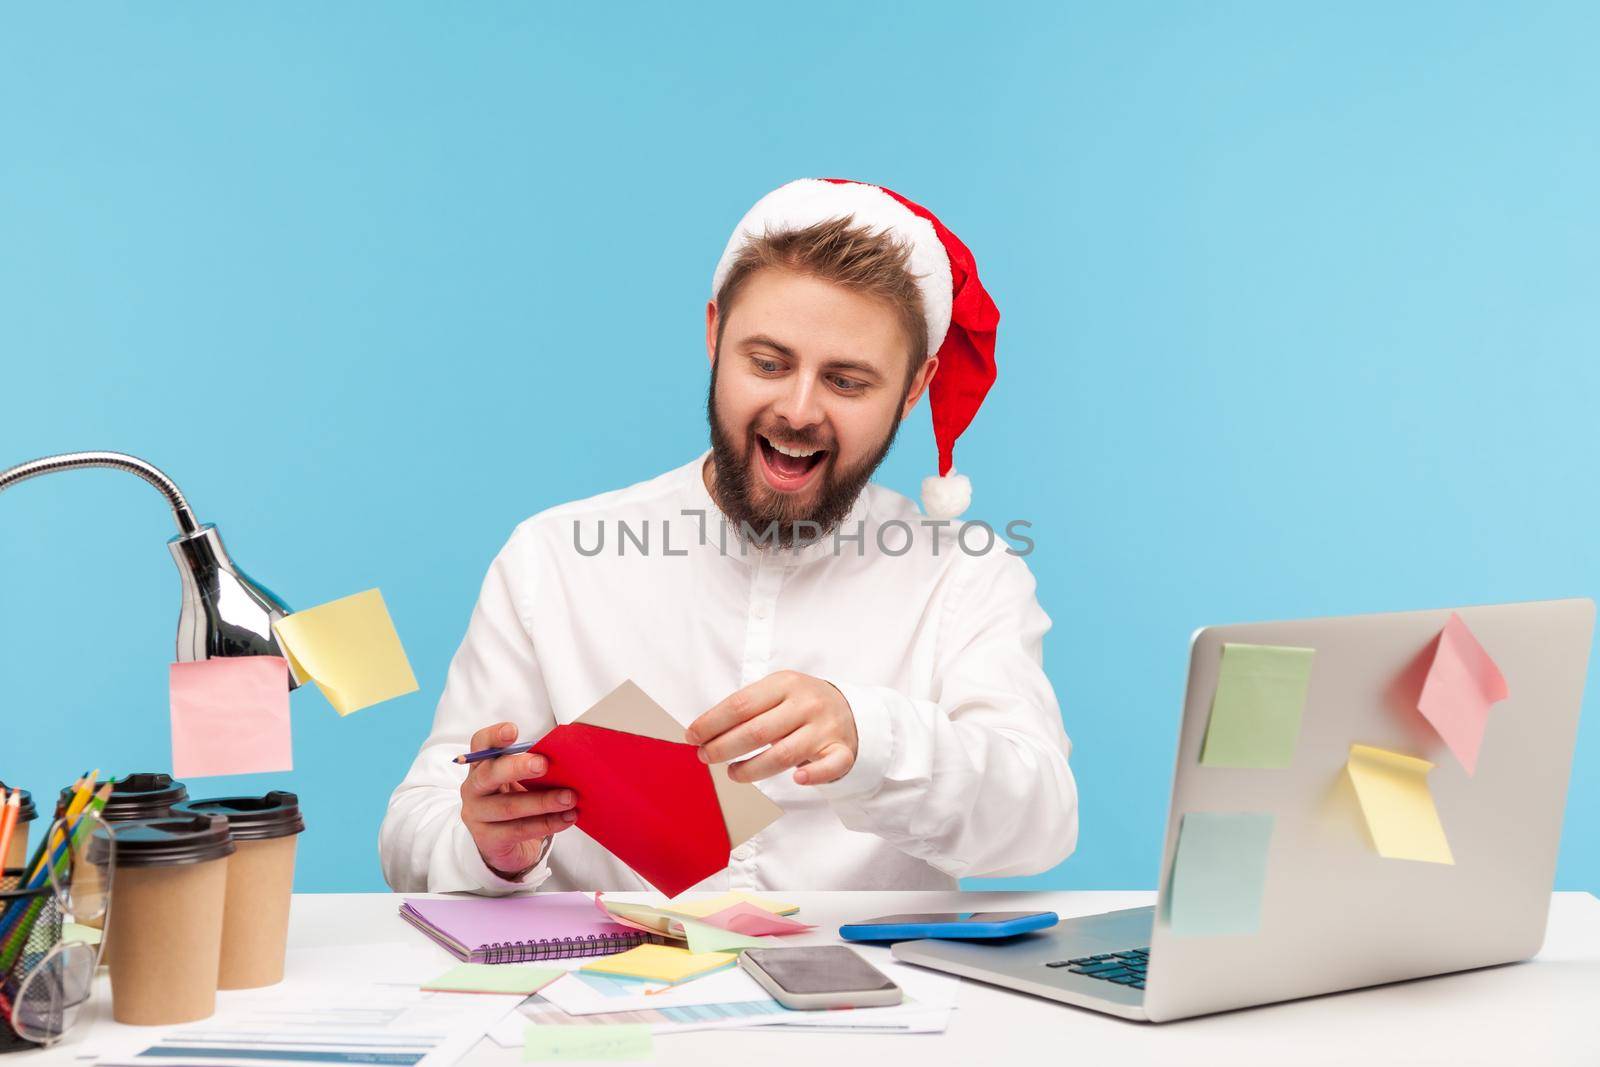 Excited bearded man in santa claus hat opening red envelope, going to read holiday greeting postcard sitting at workplace with laptop. Indoor studio shot isolated on blue background